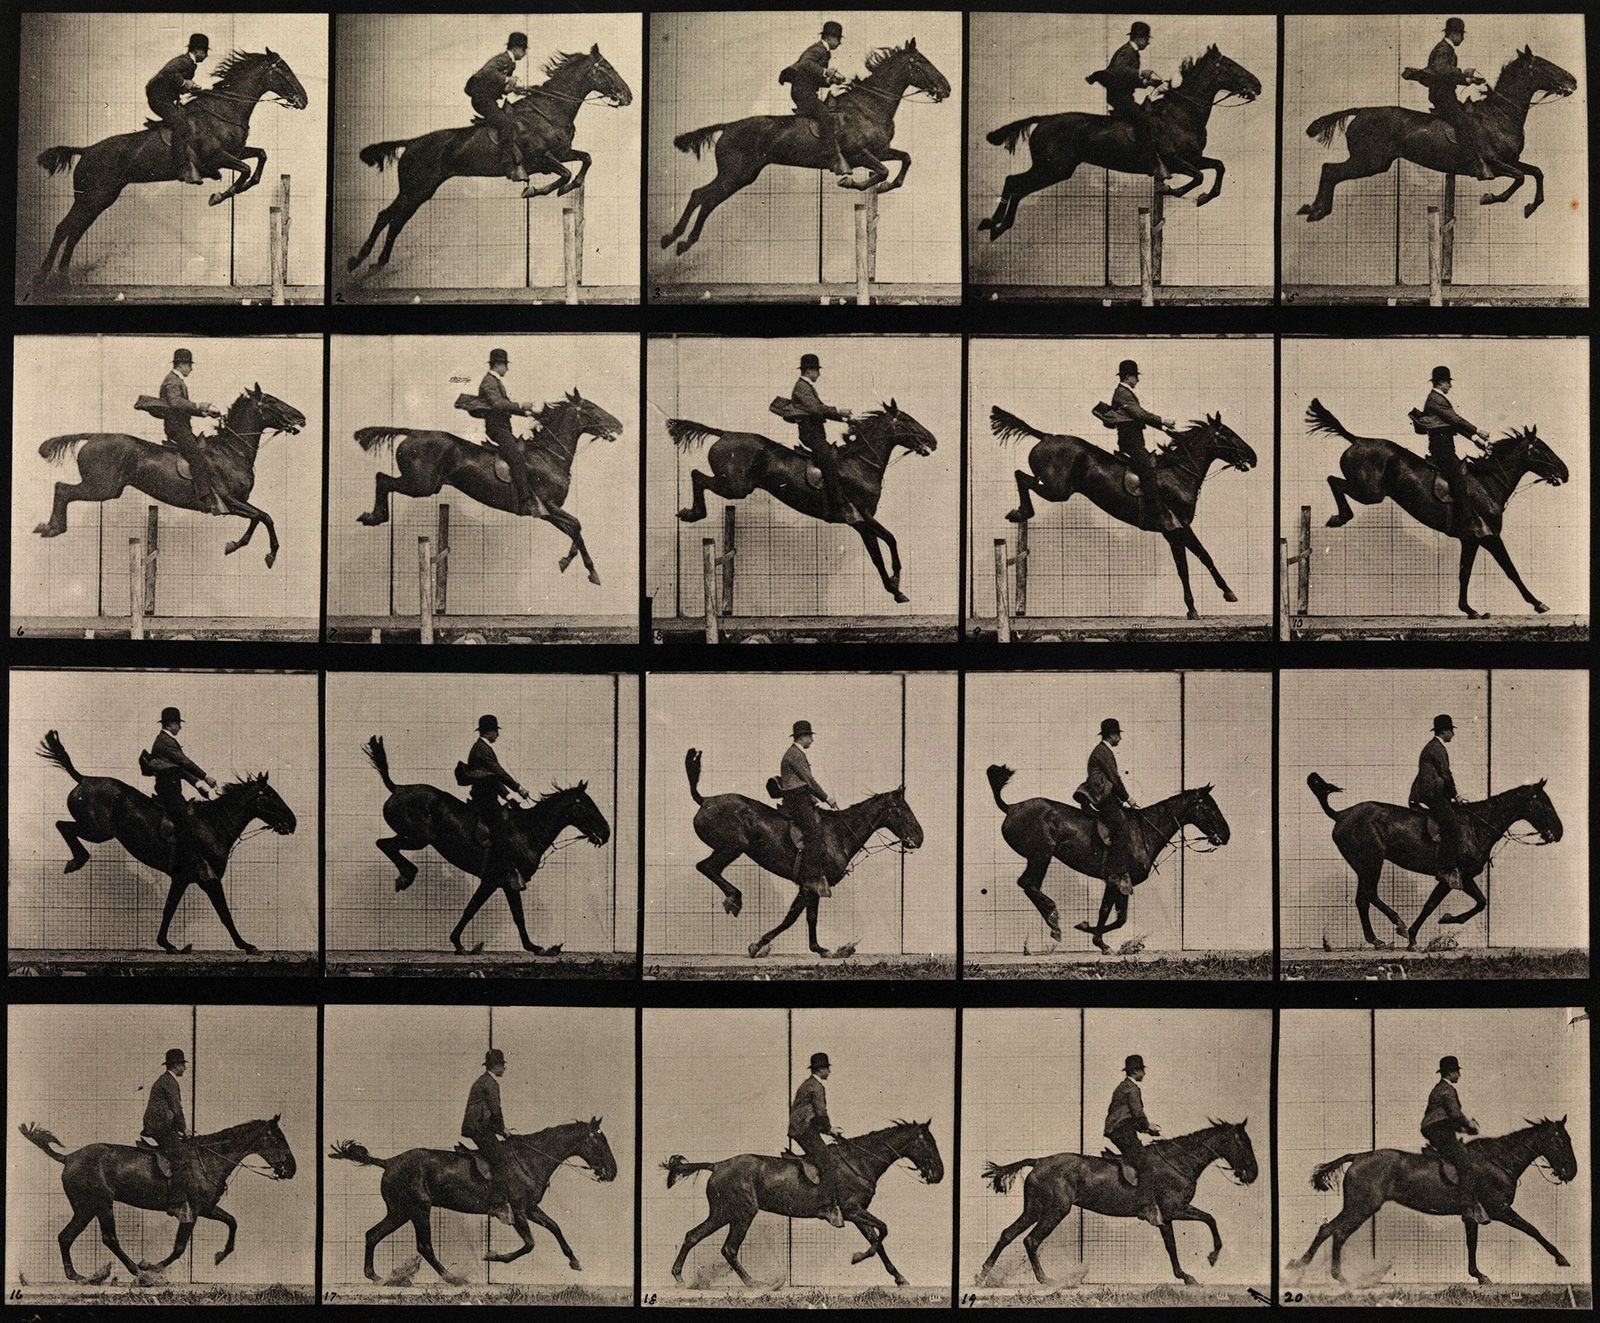 1 Muybridge, Photographic study of a man jumping a horse